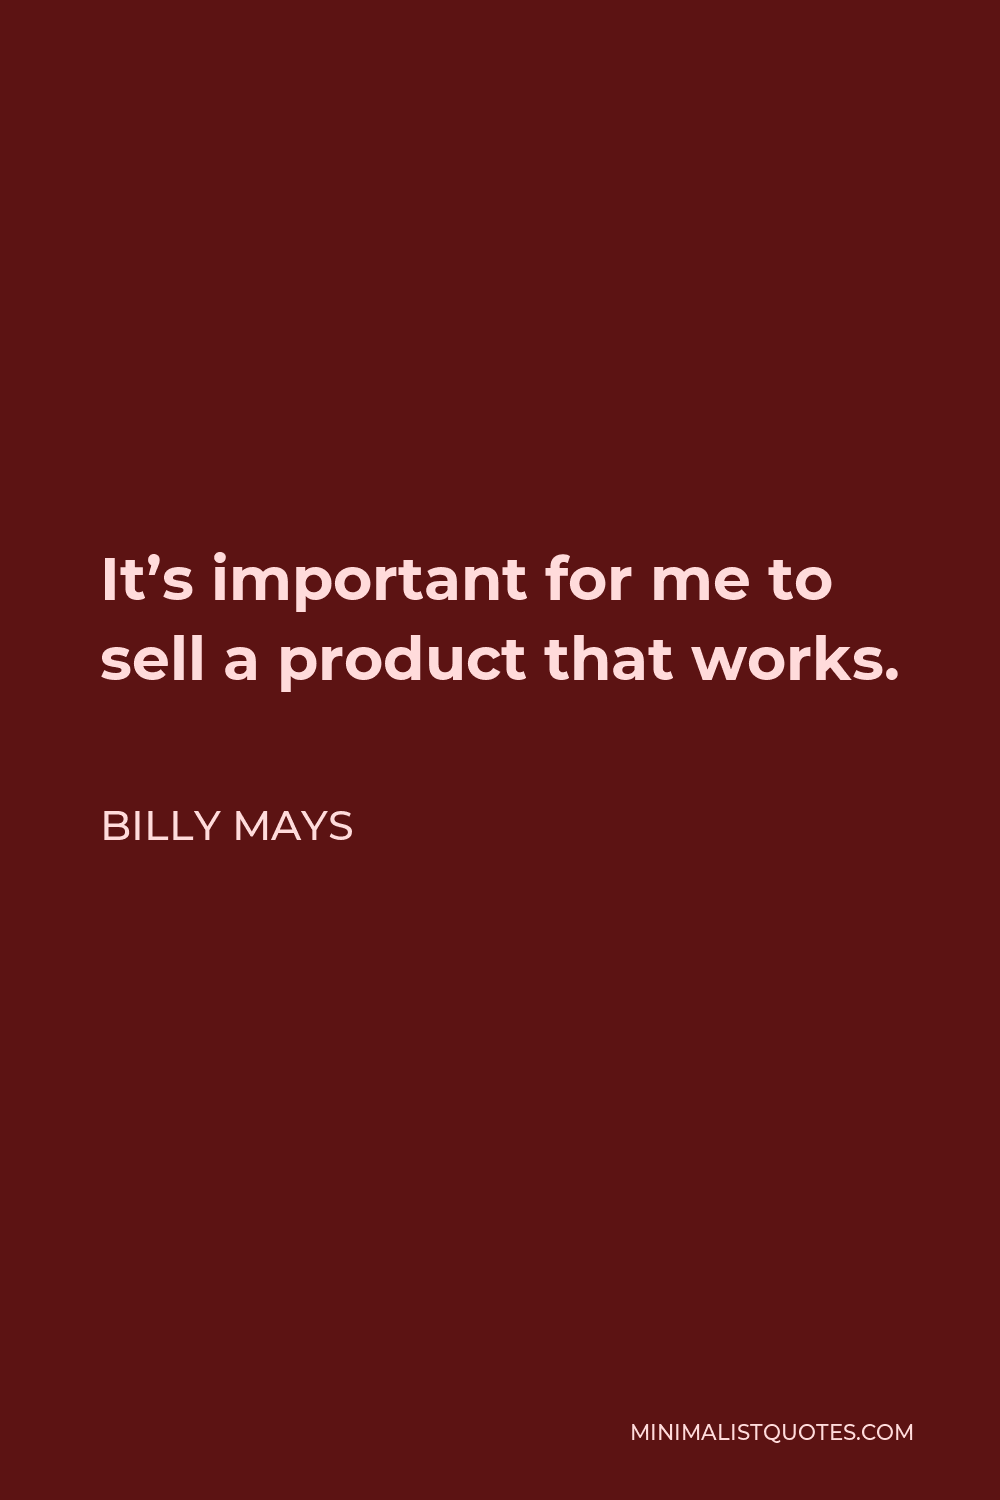 Billy Mays Quote - It’s important for me to sell a product that works.